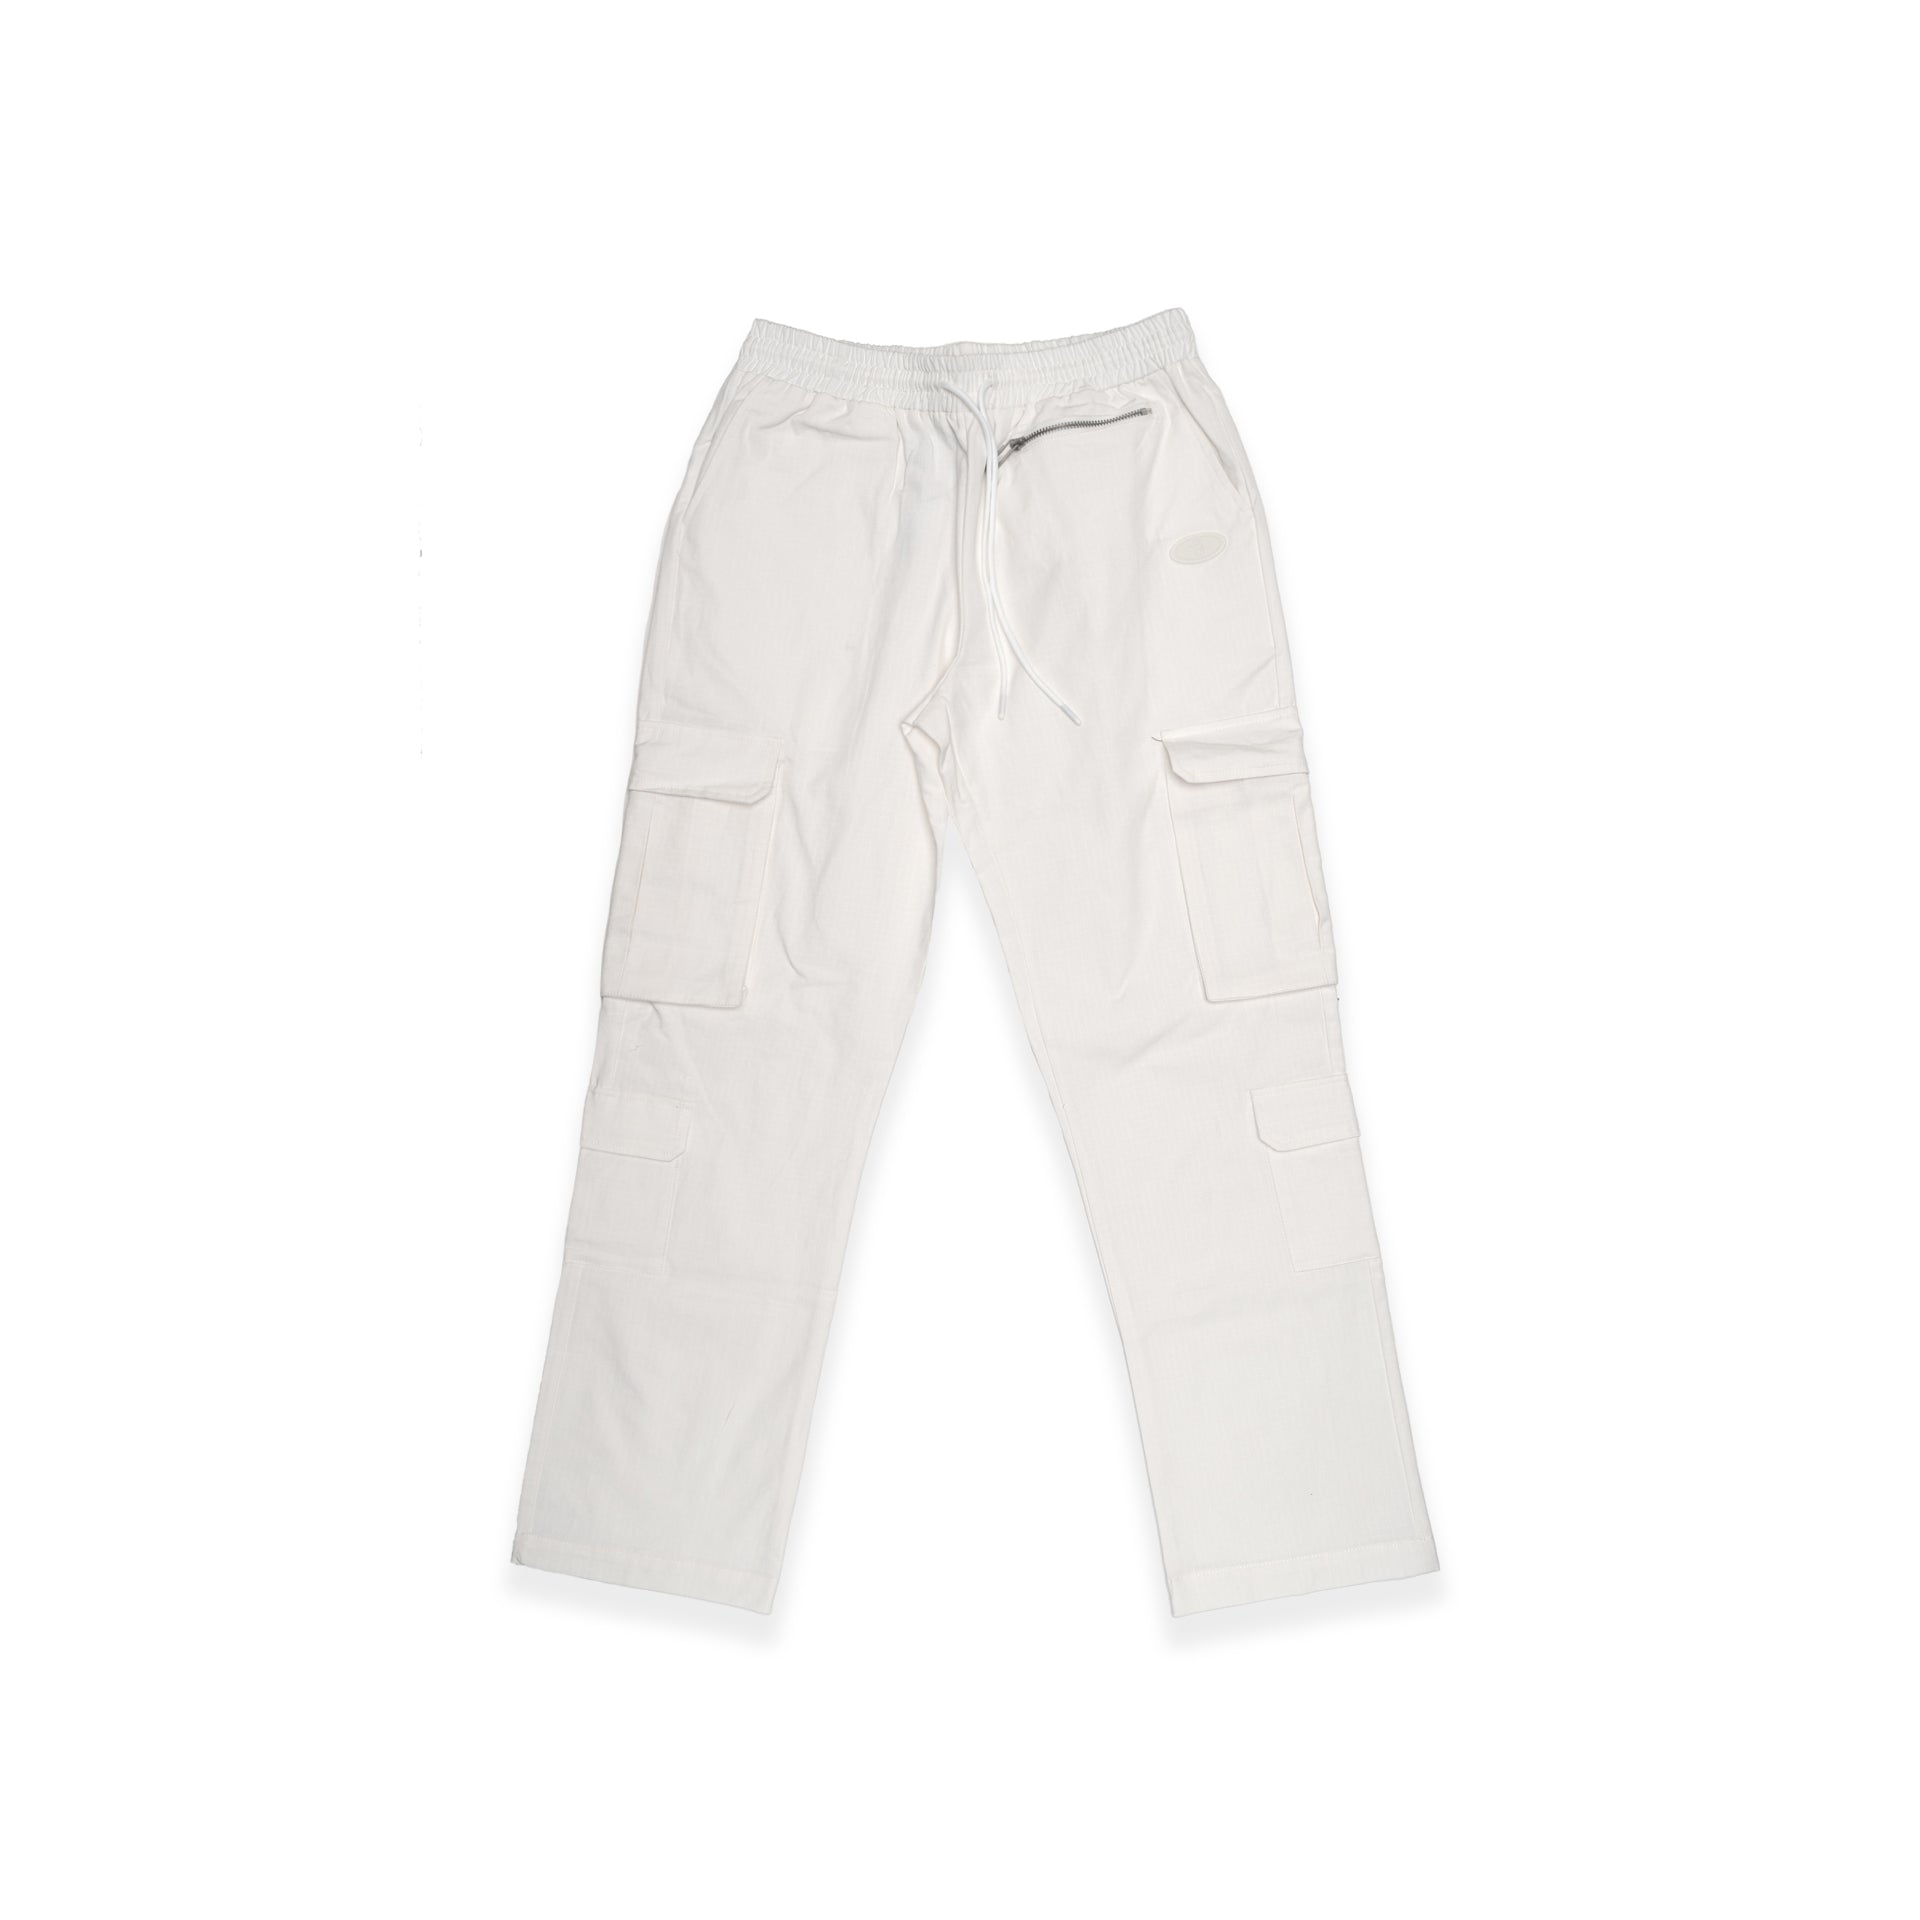 White Cargo Pants by Brandtionary